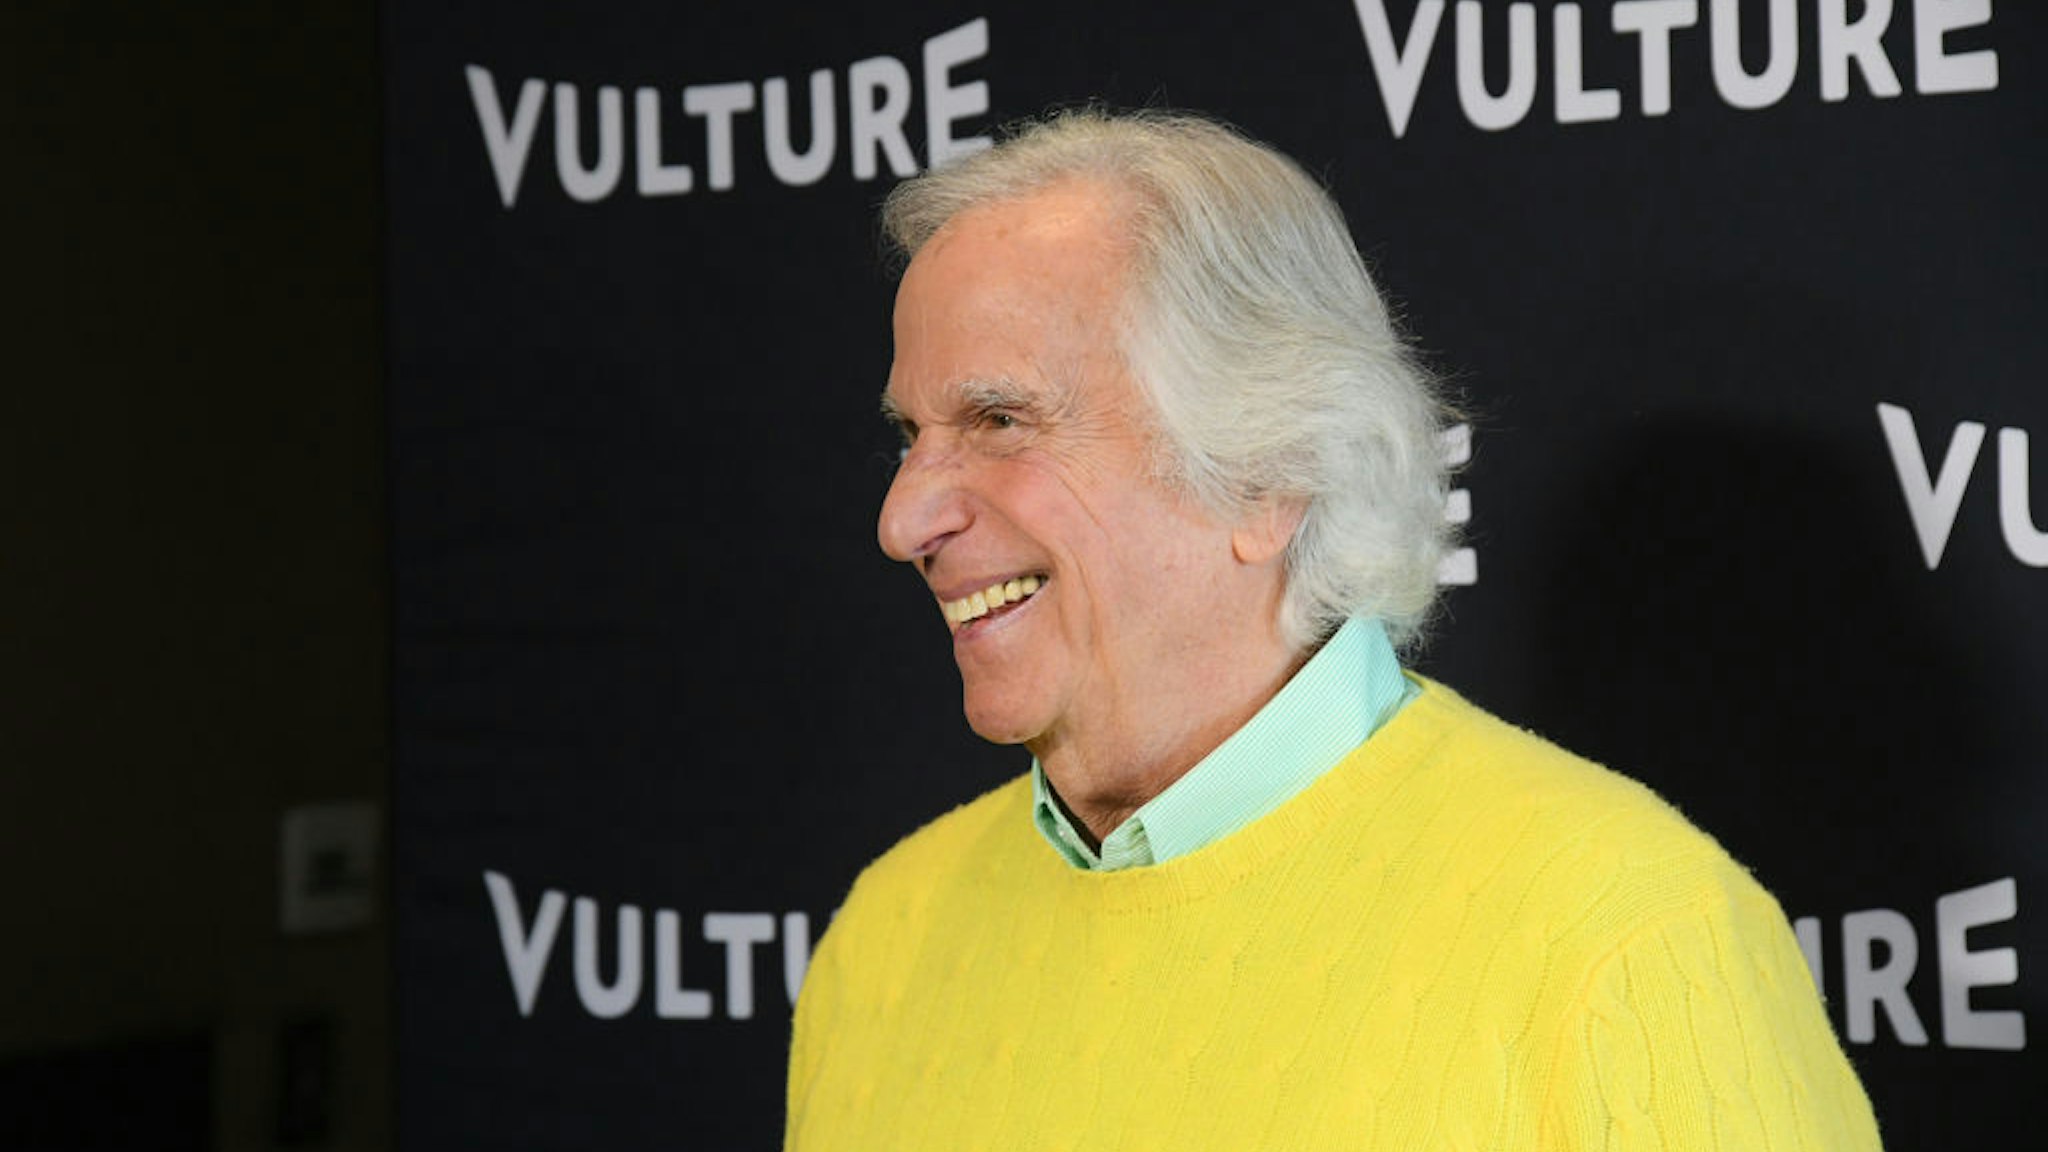 LOS ANGELES, CALIFORNIA - NOVEMBER 12: Henry Winkler attends Vulture Festival 2022 Los Angeles at The Hollywood Roosevelt on November 12, 2022 in Los Angeles, California. (Photo by Michael Tullberg/Getty Images)